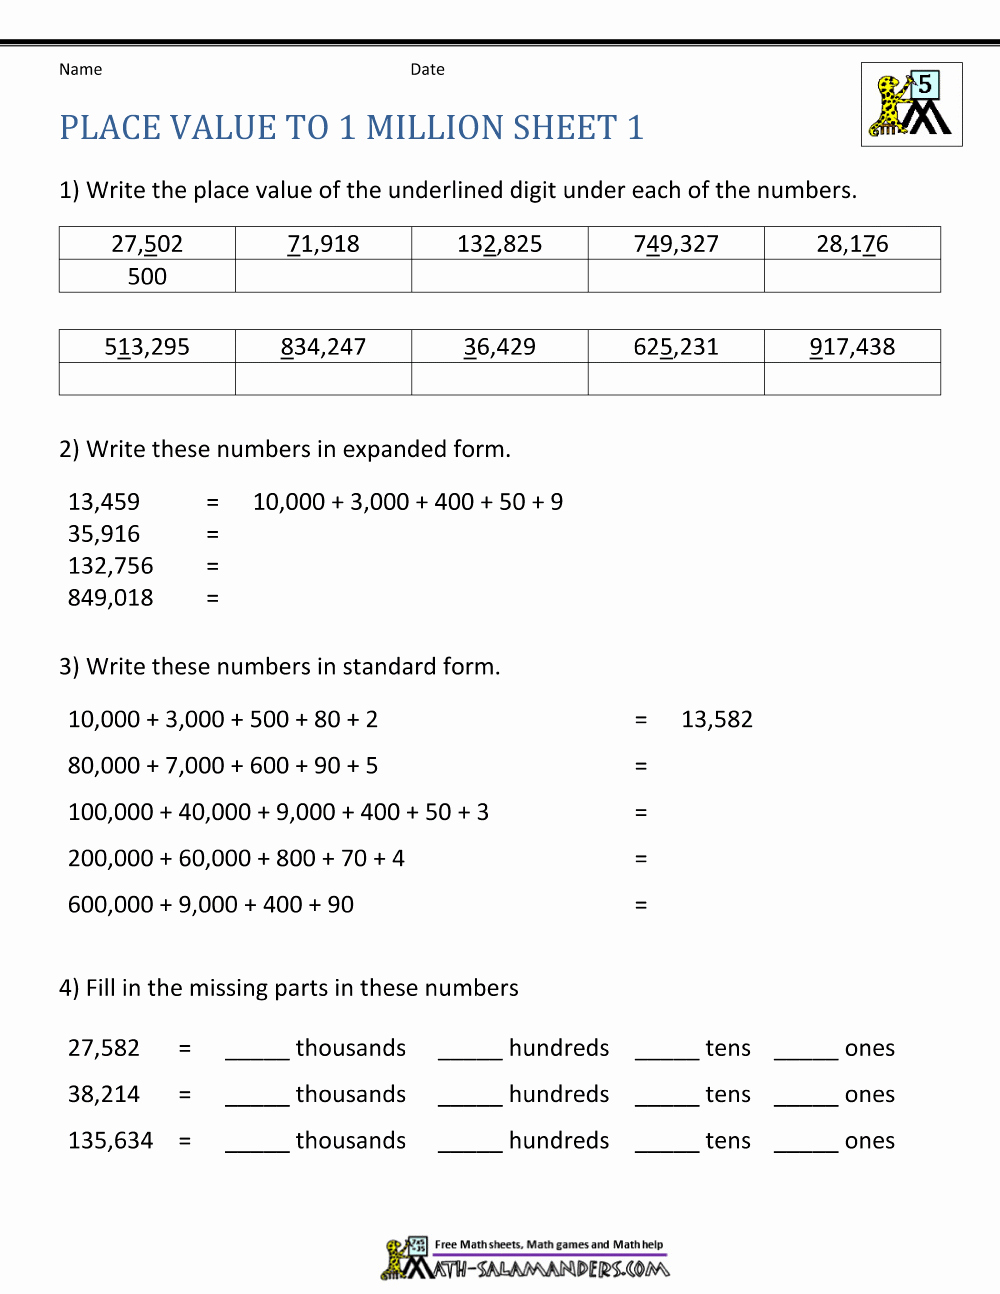 5th Grade Expanded form Worksheets Awesome 5th Grade Math Worksheets Place Value to 1 Million 1